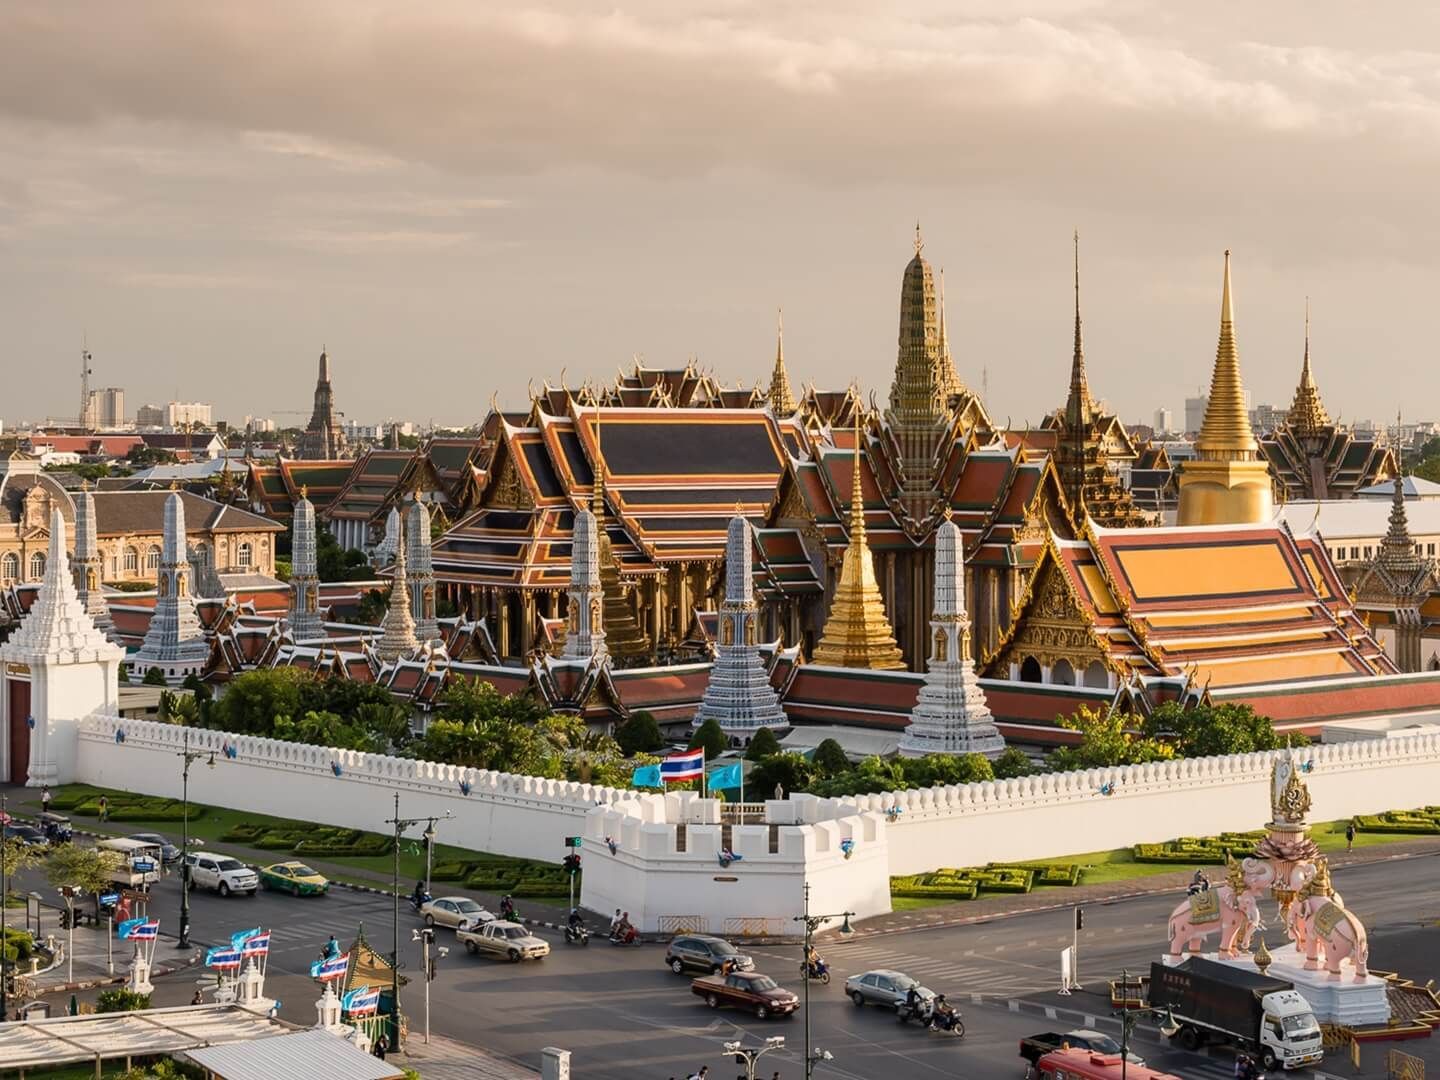 Aerial view of the Grand Palace near Maitria Mode Sukhumvit 15